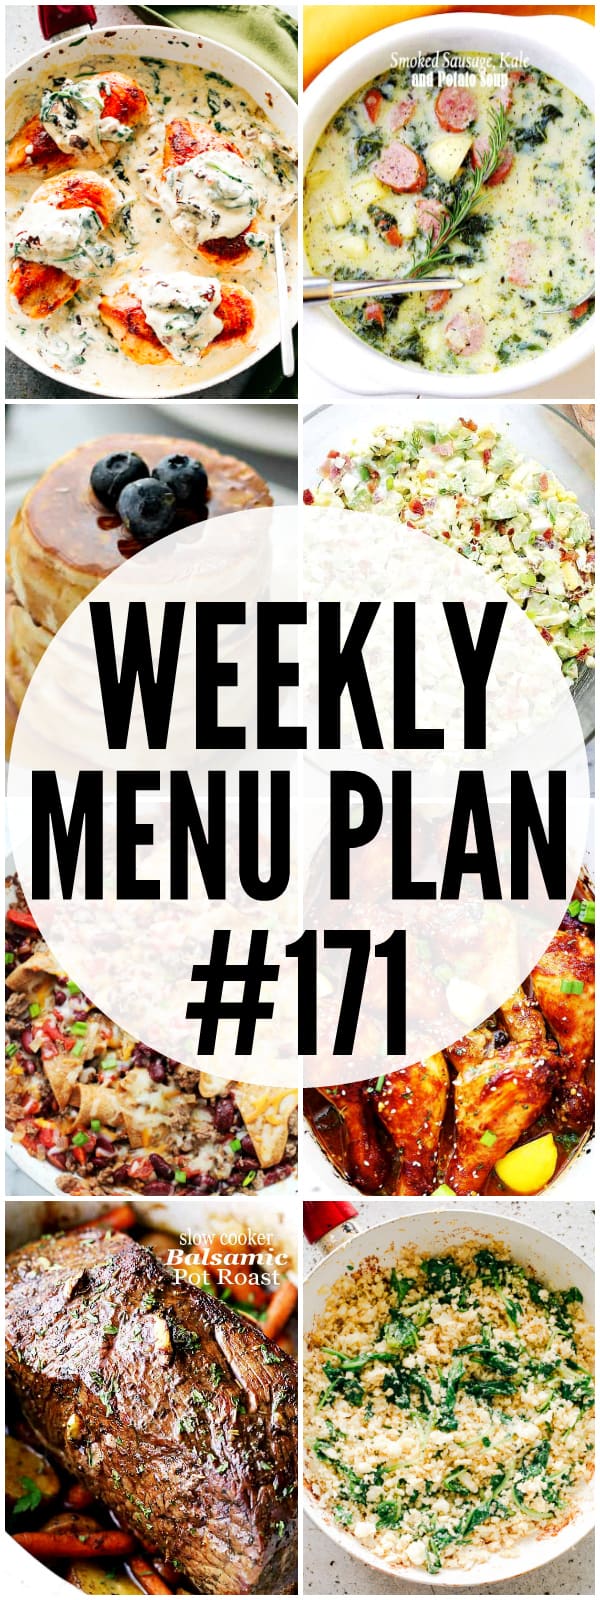 WEEKLY MENU PLAN (#171) - A delicious collection of dinner, side dish and dessert recipes to help you plan your weekly menu and make life easier for you!